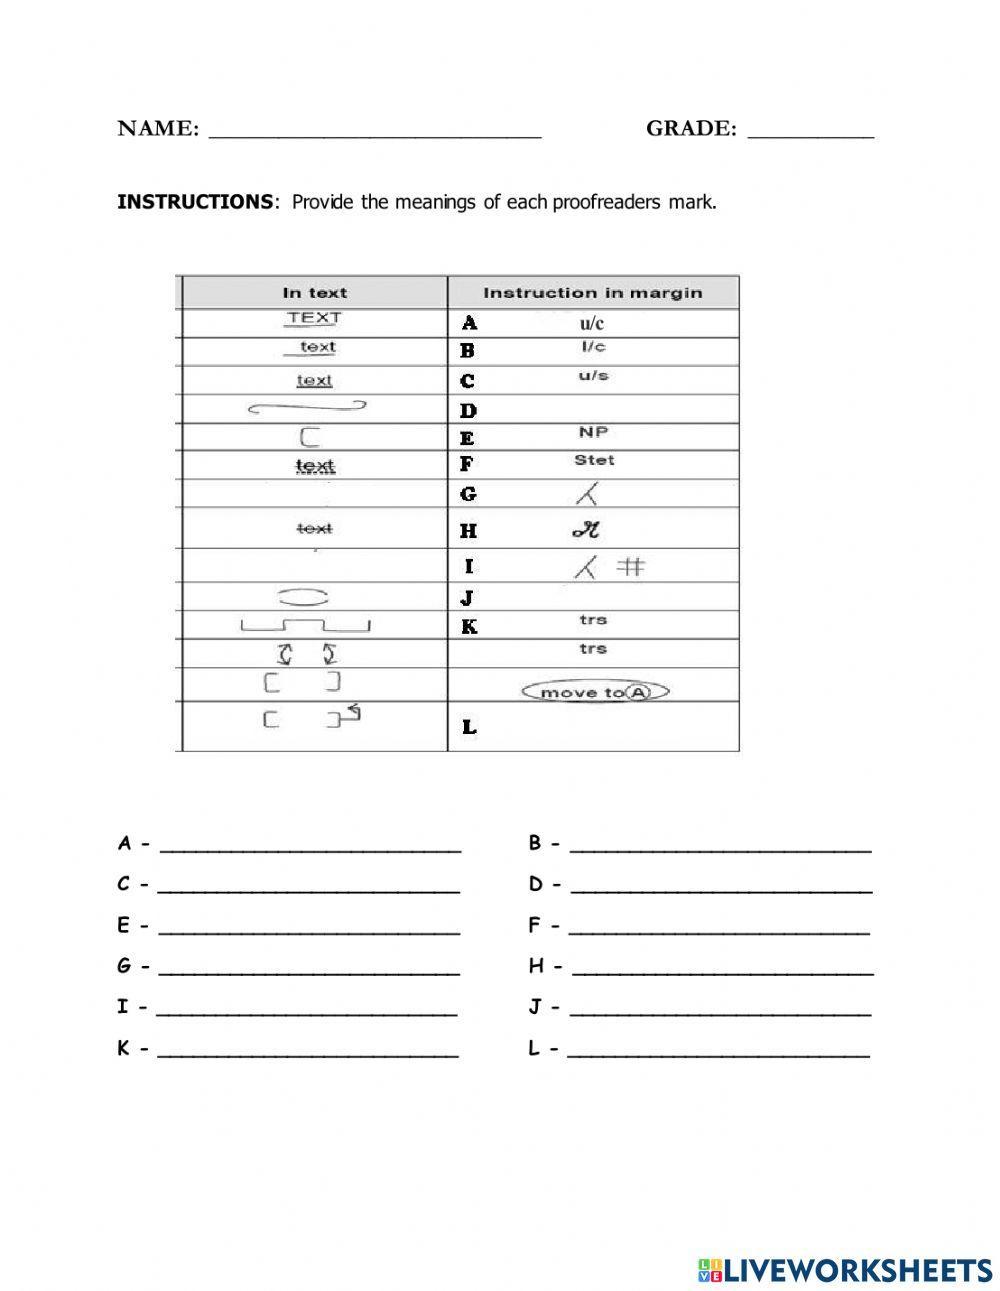 Proofreaders' Marks - letters